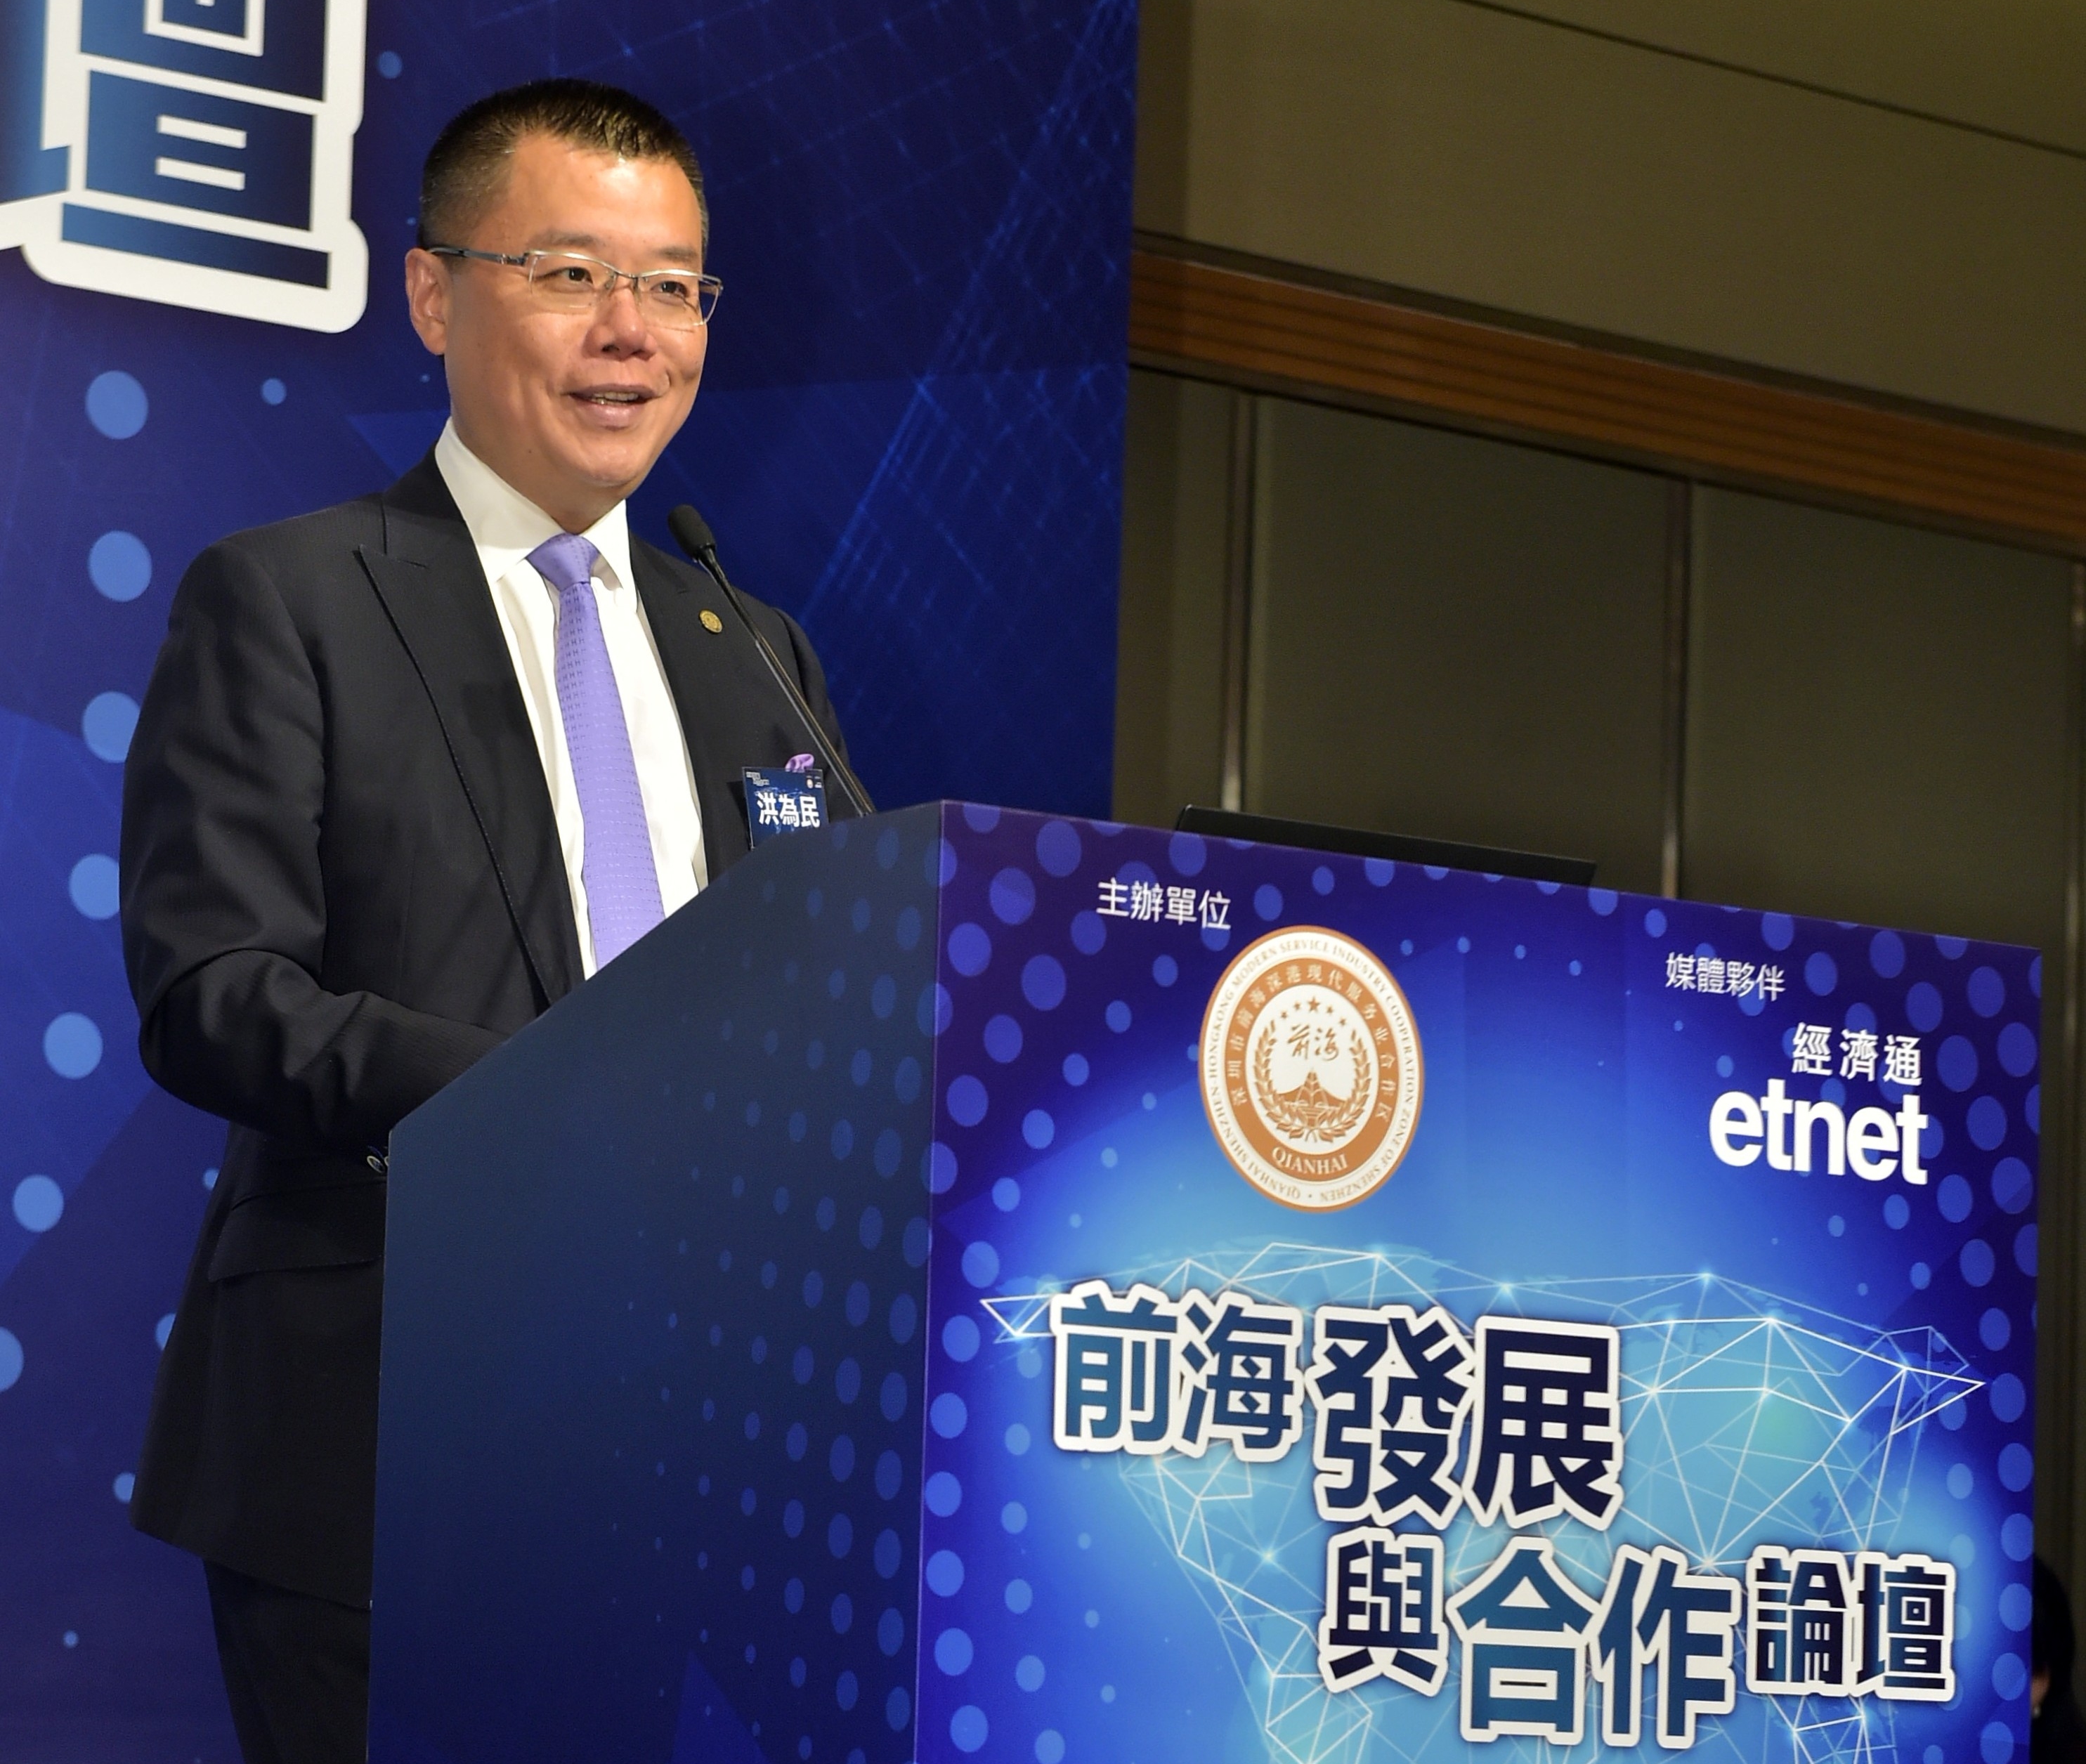 Experts see future fintech role for HK, Shenzhen